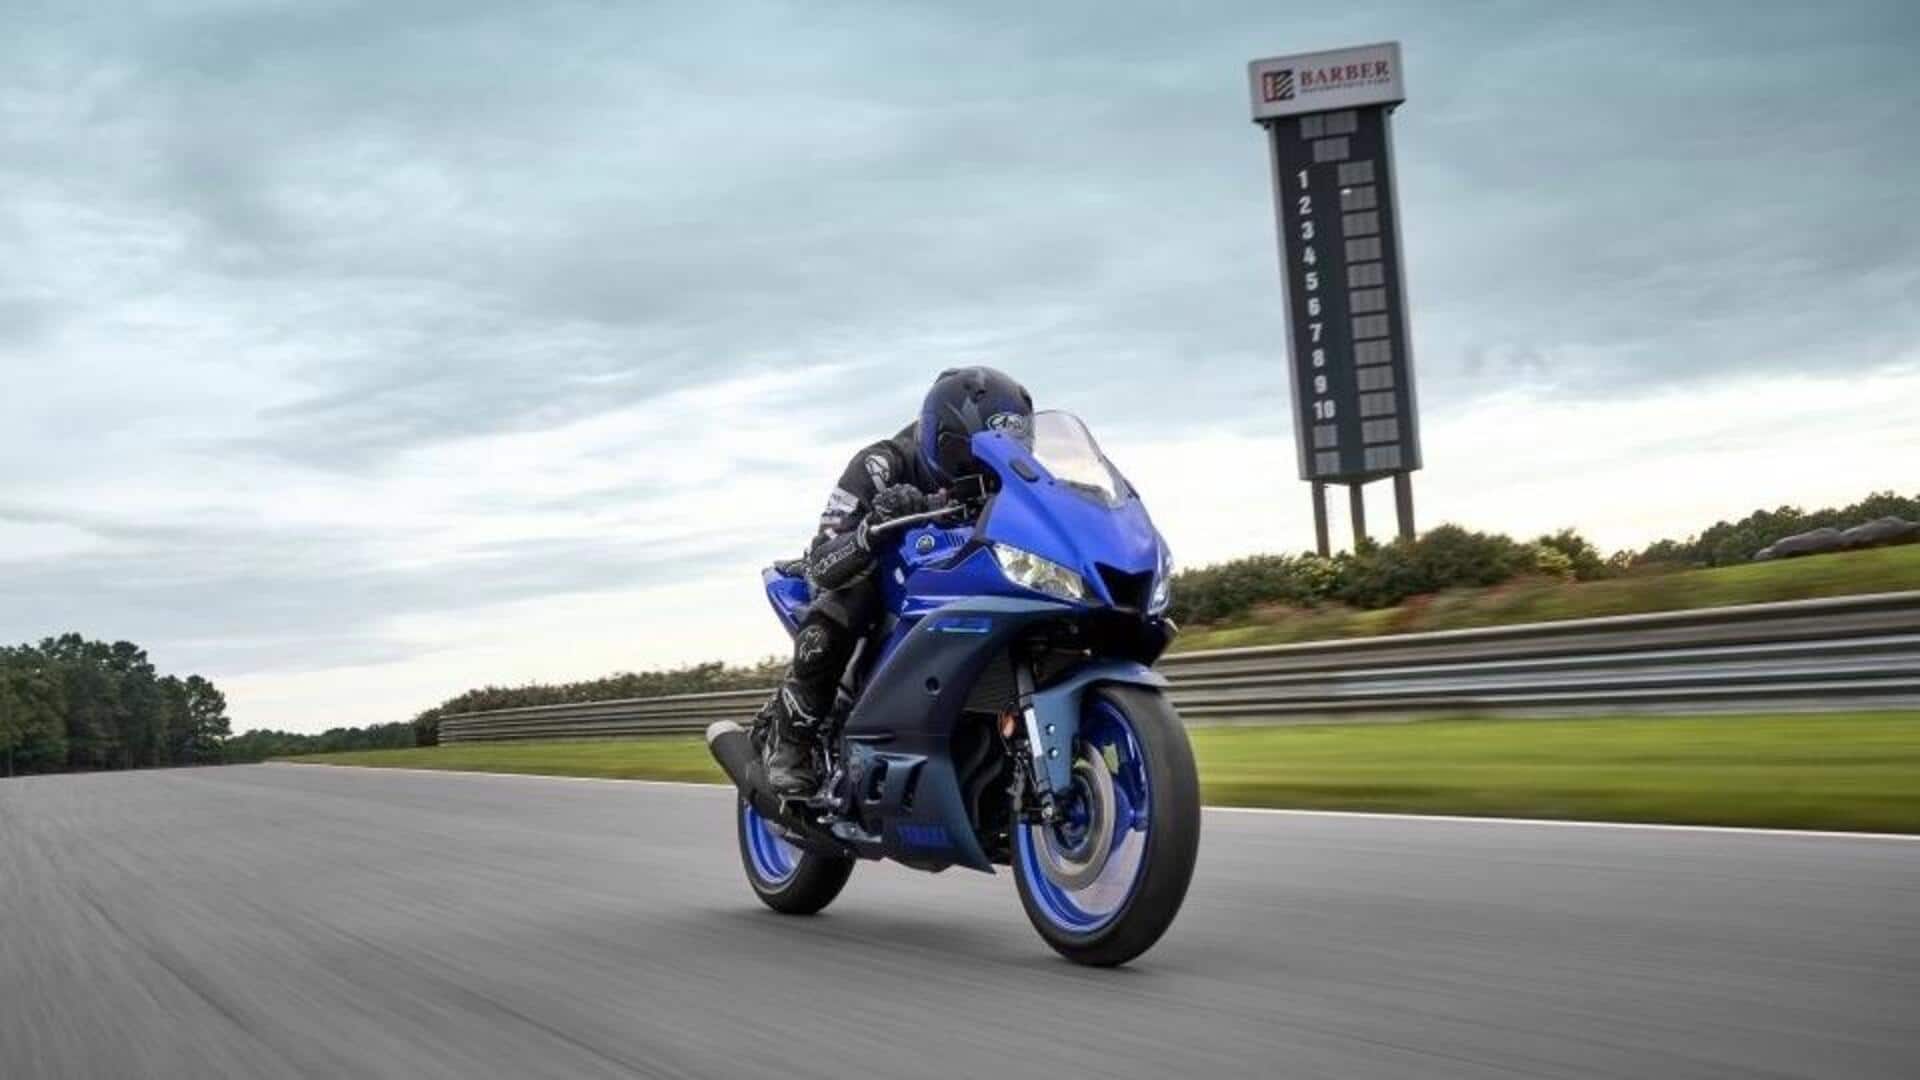 Yamaha unveils YZF-R3 at MotoGP Bharat: Check expected price